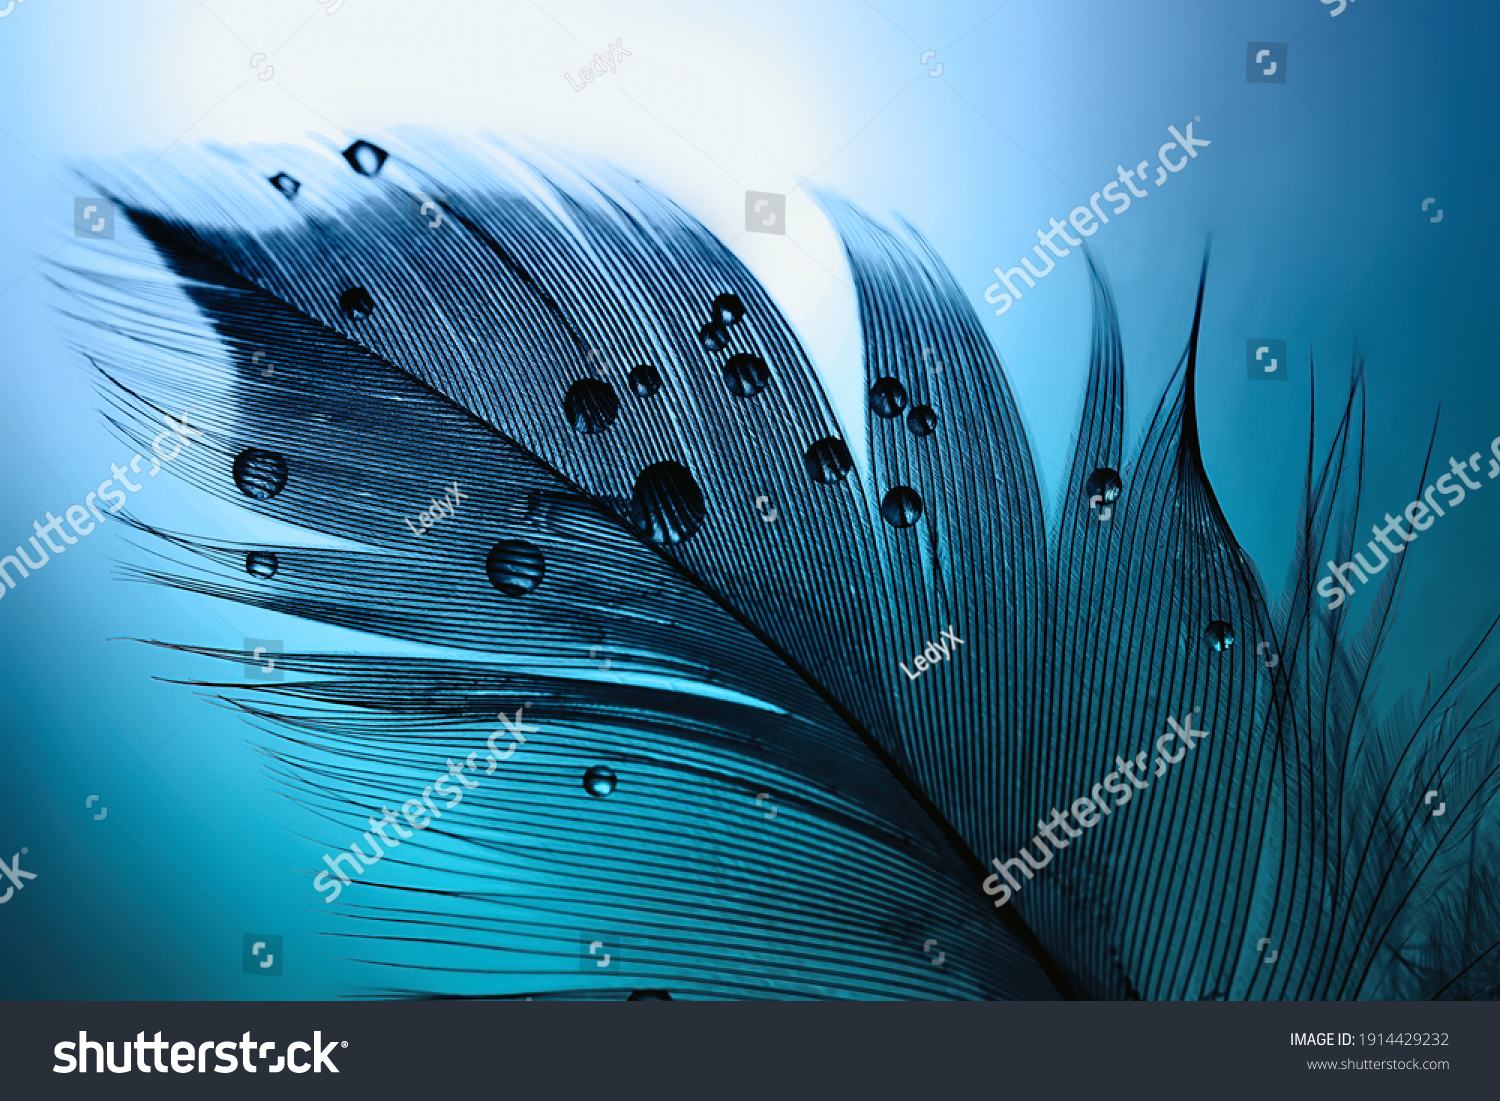 Silhouette of  black bird feather with water drops on a blue turquoise background with beautiful lighting. Elegant bright and expressive artistic image. #1914429232